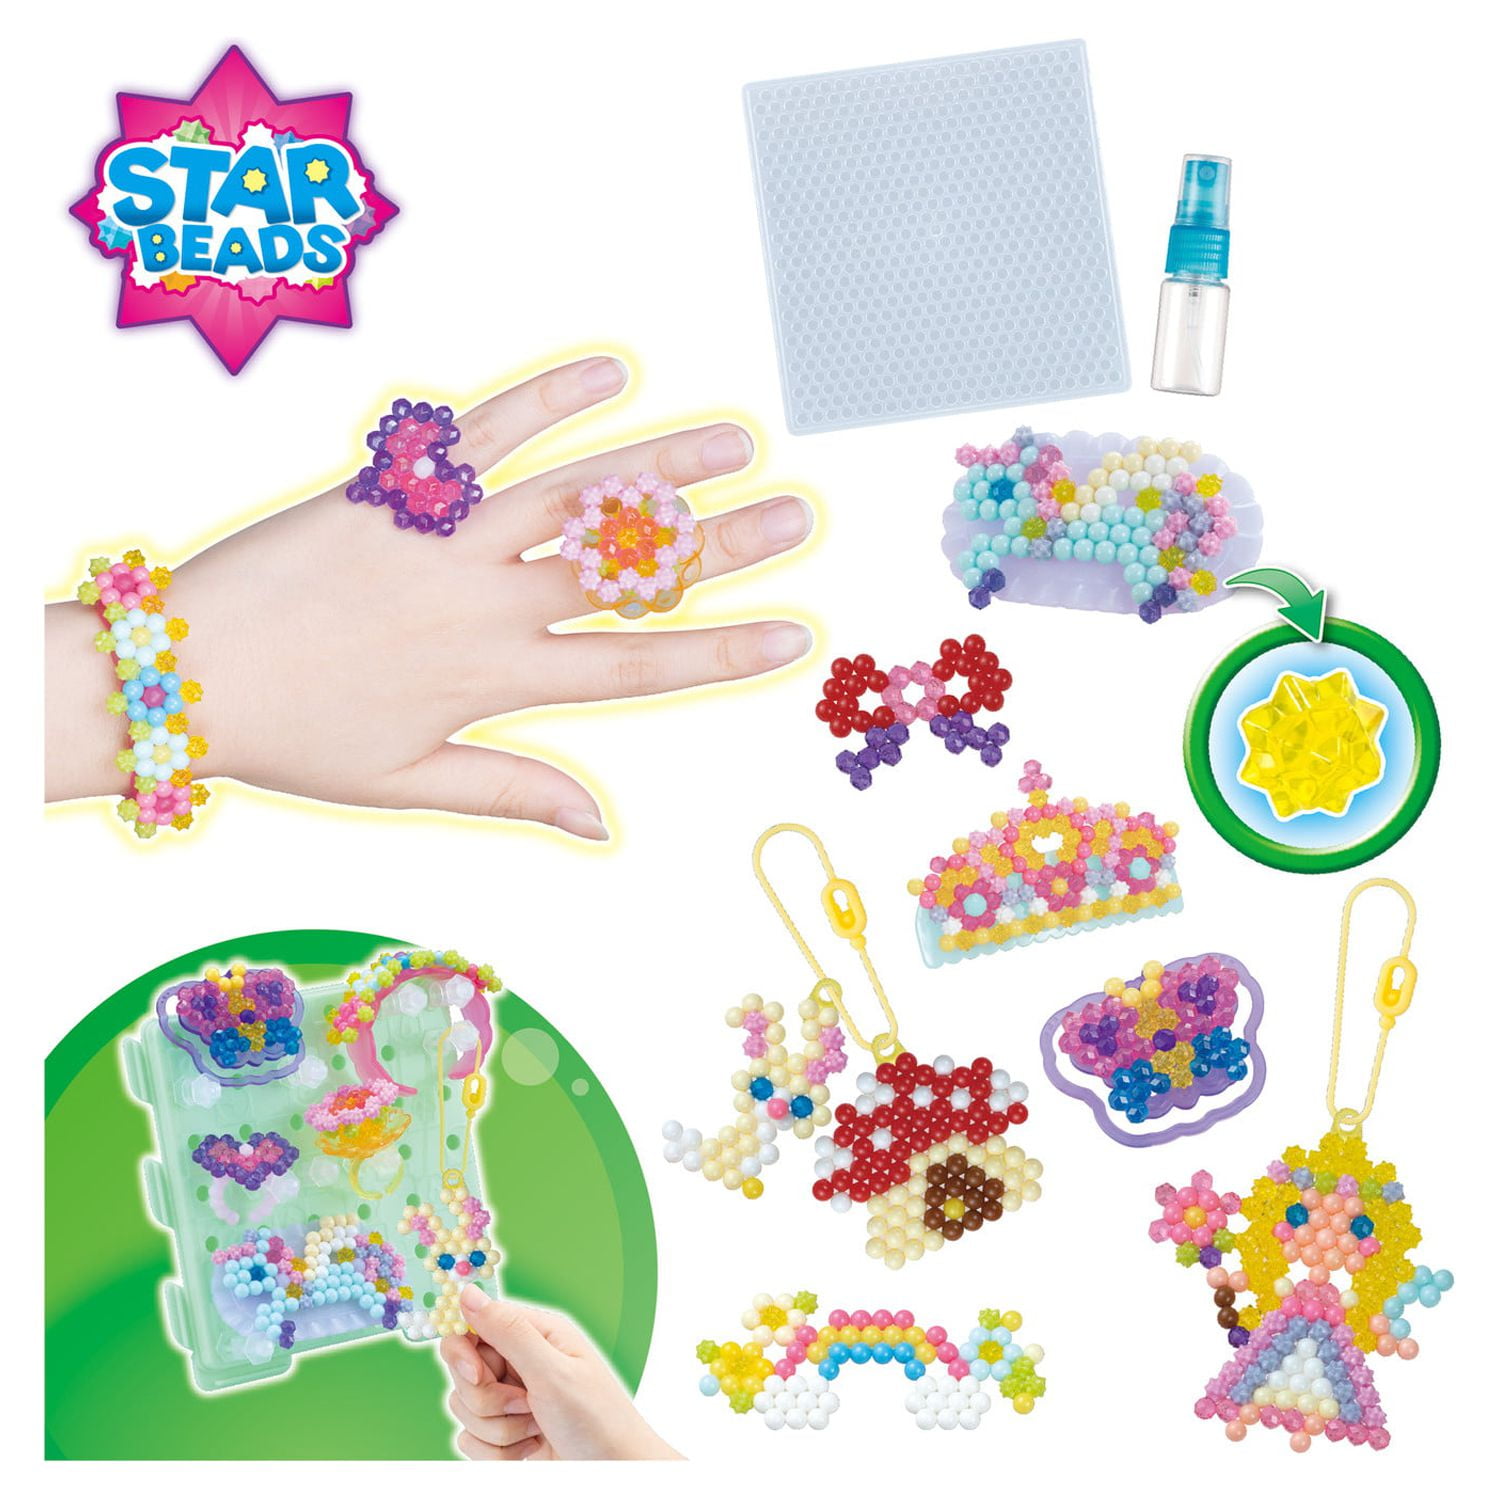 Fundamental Toys Aquabeads - Solid Beads, White - Macy's